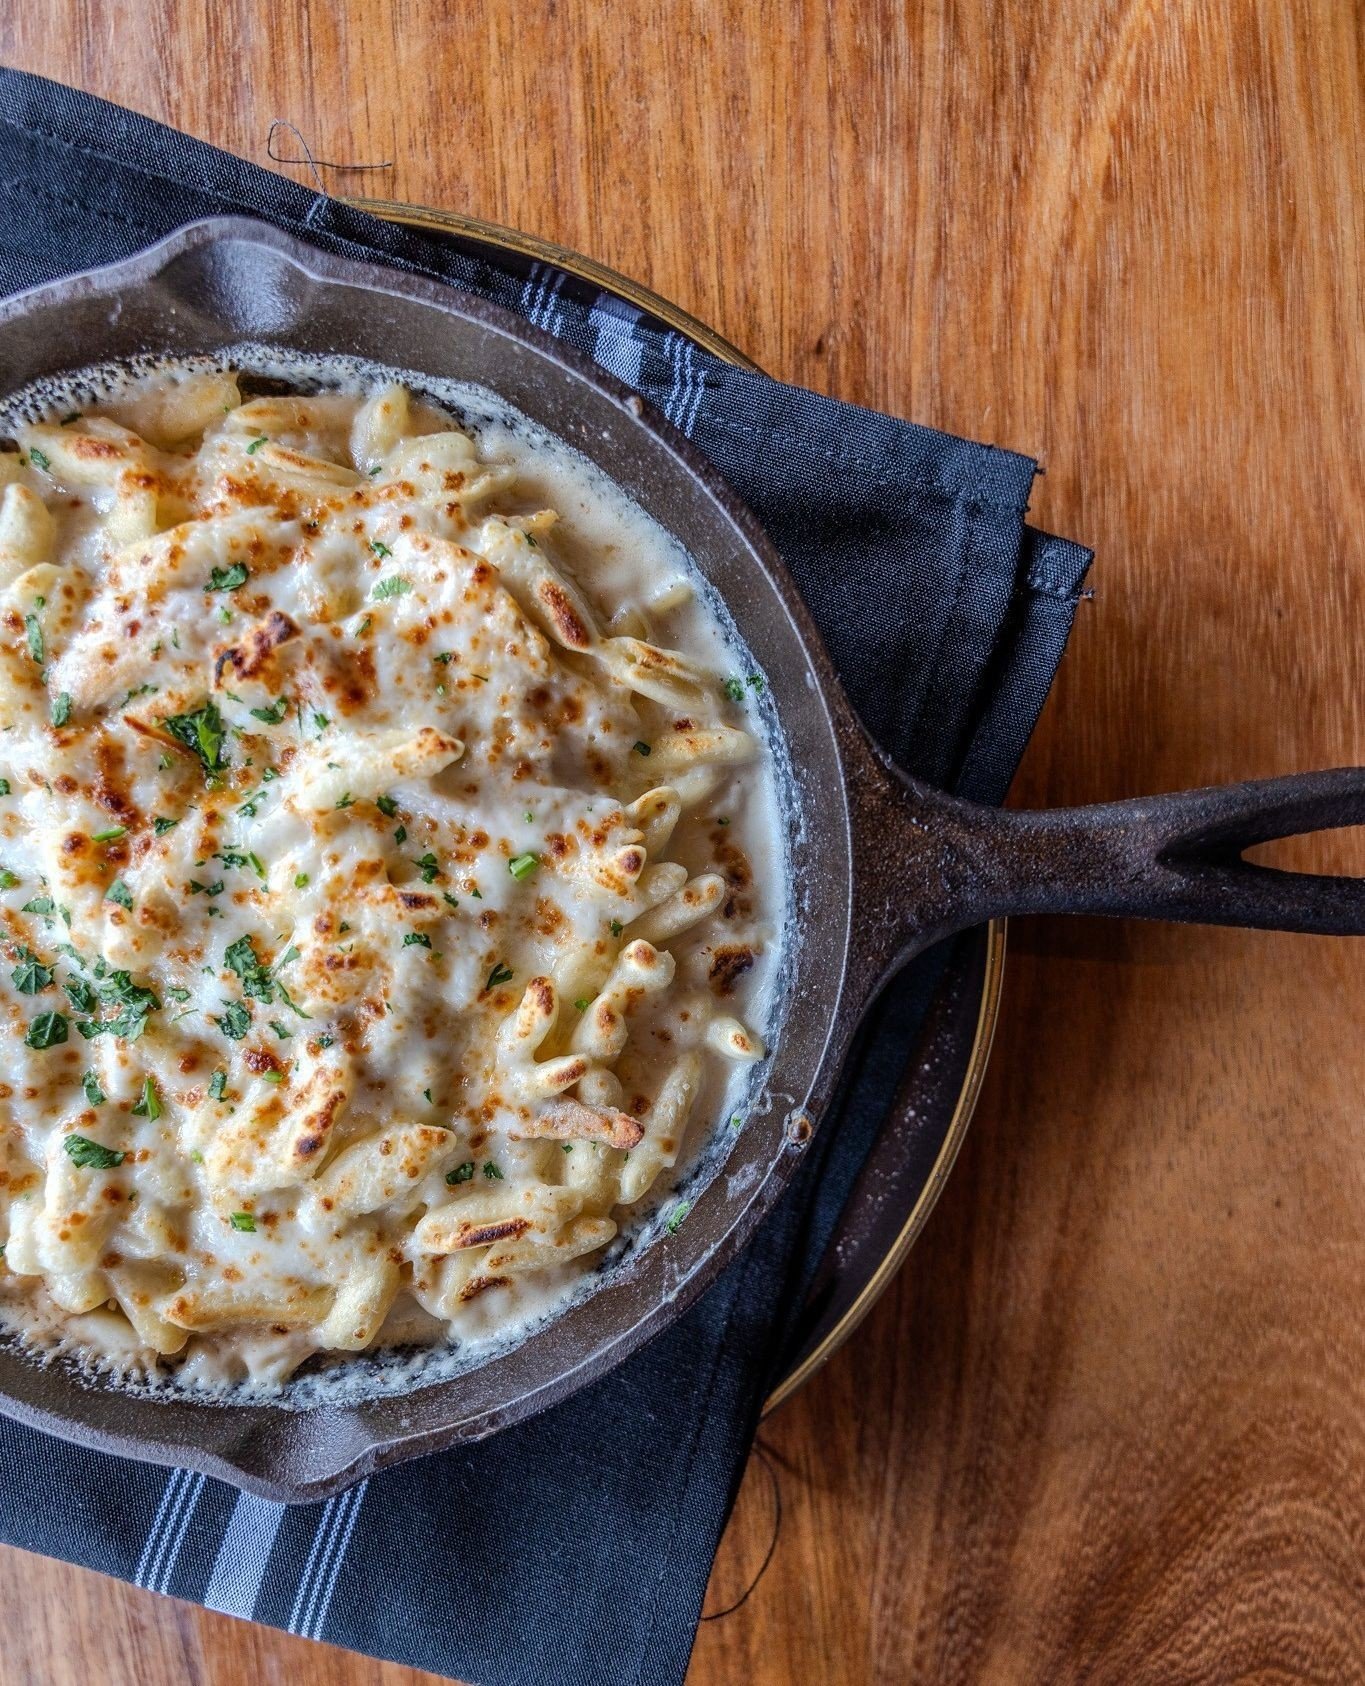 Baked Chicken Alfredo 🔥⁠
CAVATELLE PASTA + PULLED ROTISSERIE CHICKEN + PARMIGIANO CREAM SAUCE + MOZZARELLA 🤤⁠
⁠
If you haven't given this bad mamma jamma a try, you MUST!⁠
⁠
We're on OpenTable for reservations &ndash; we'll see you soon 😎⁠
.⁠
.⁠
.